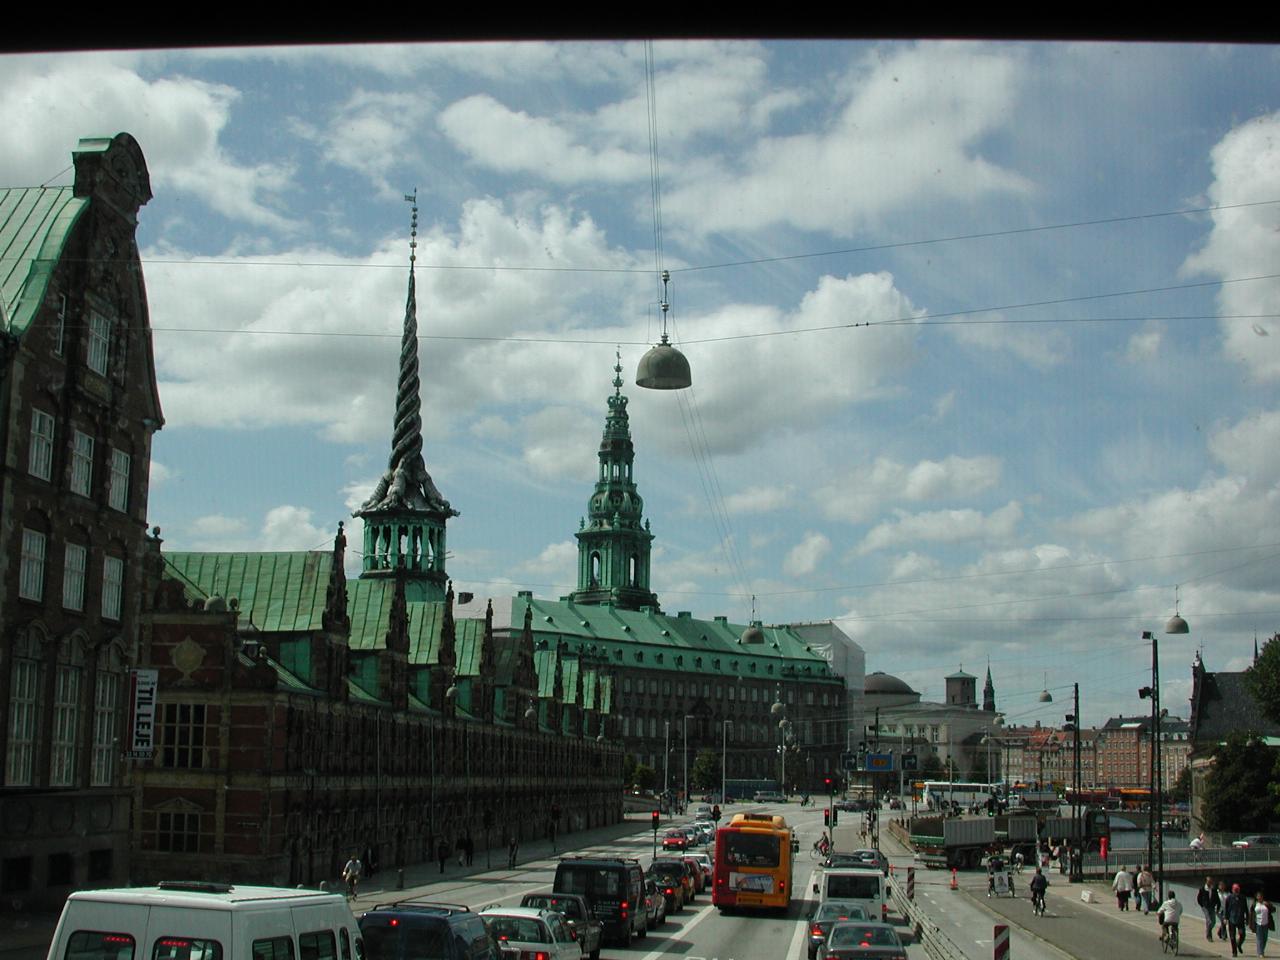 KPLU Viking Jazz: Borsen and Christiansborg Slot from bus in from the airport